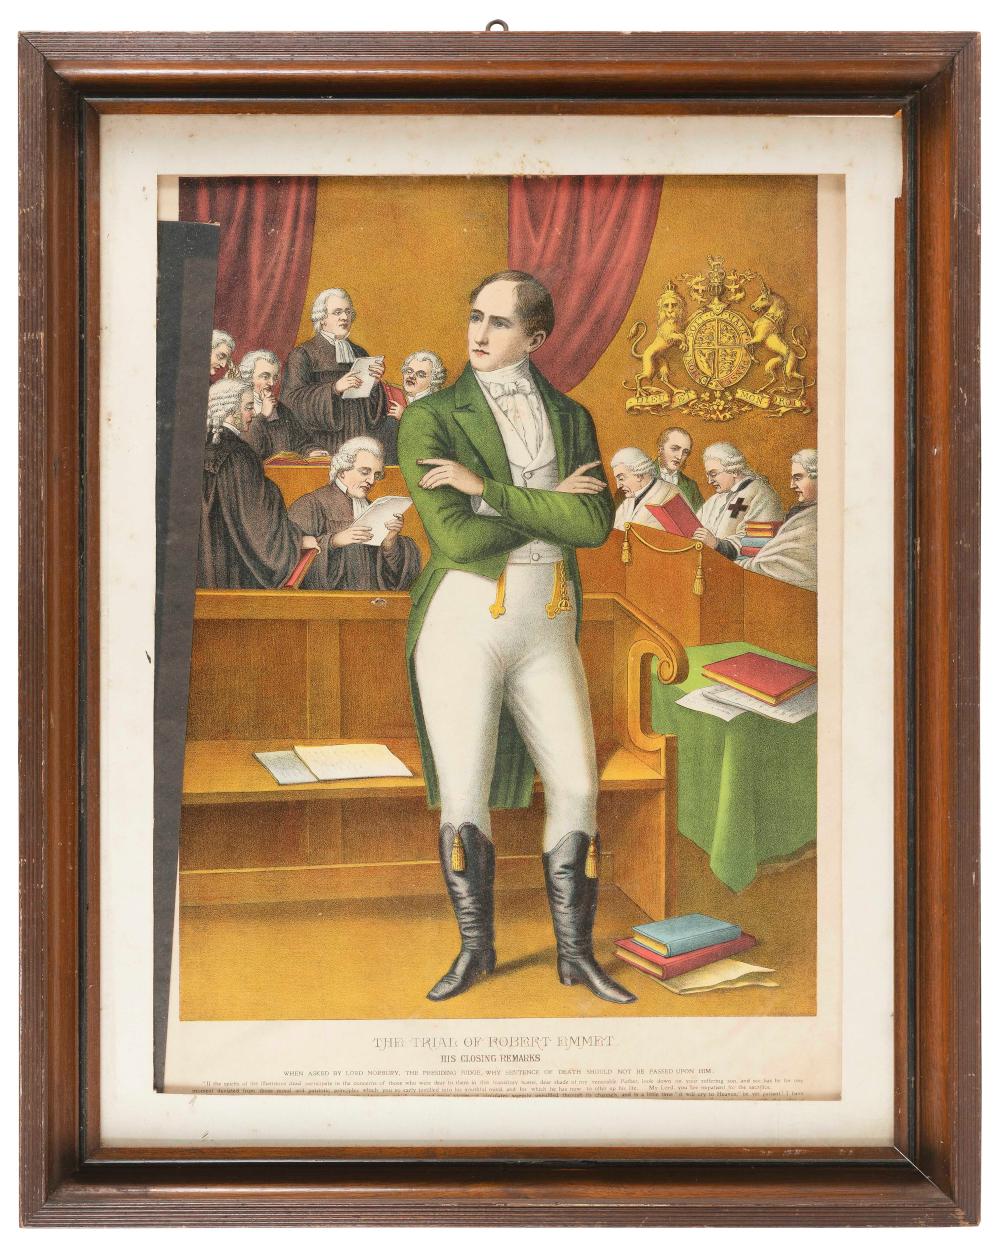 CHROMOLITHOGRAPH "THE TRIAL OF